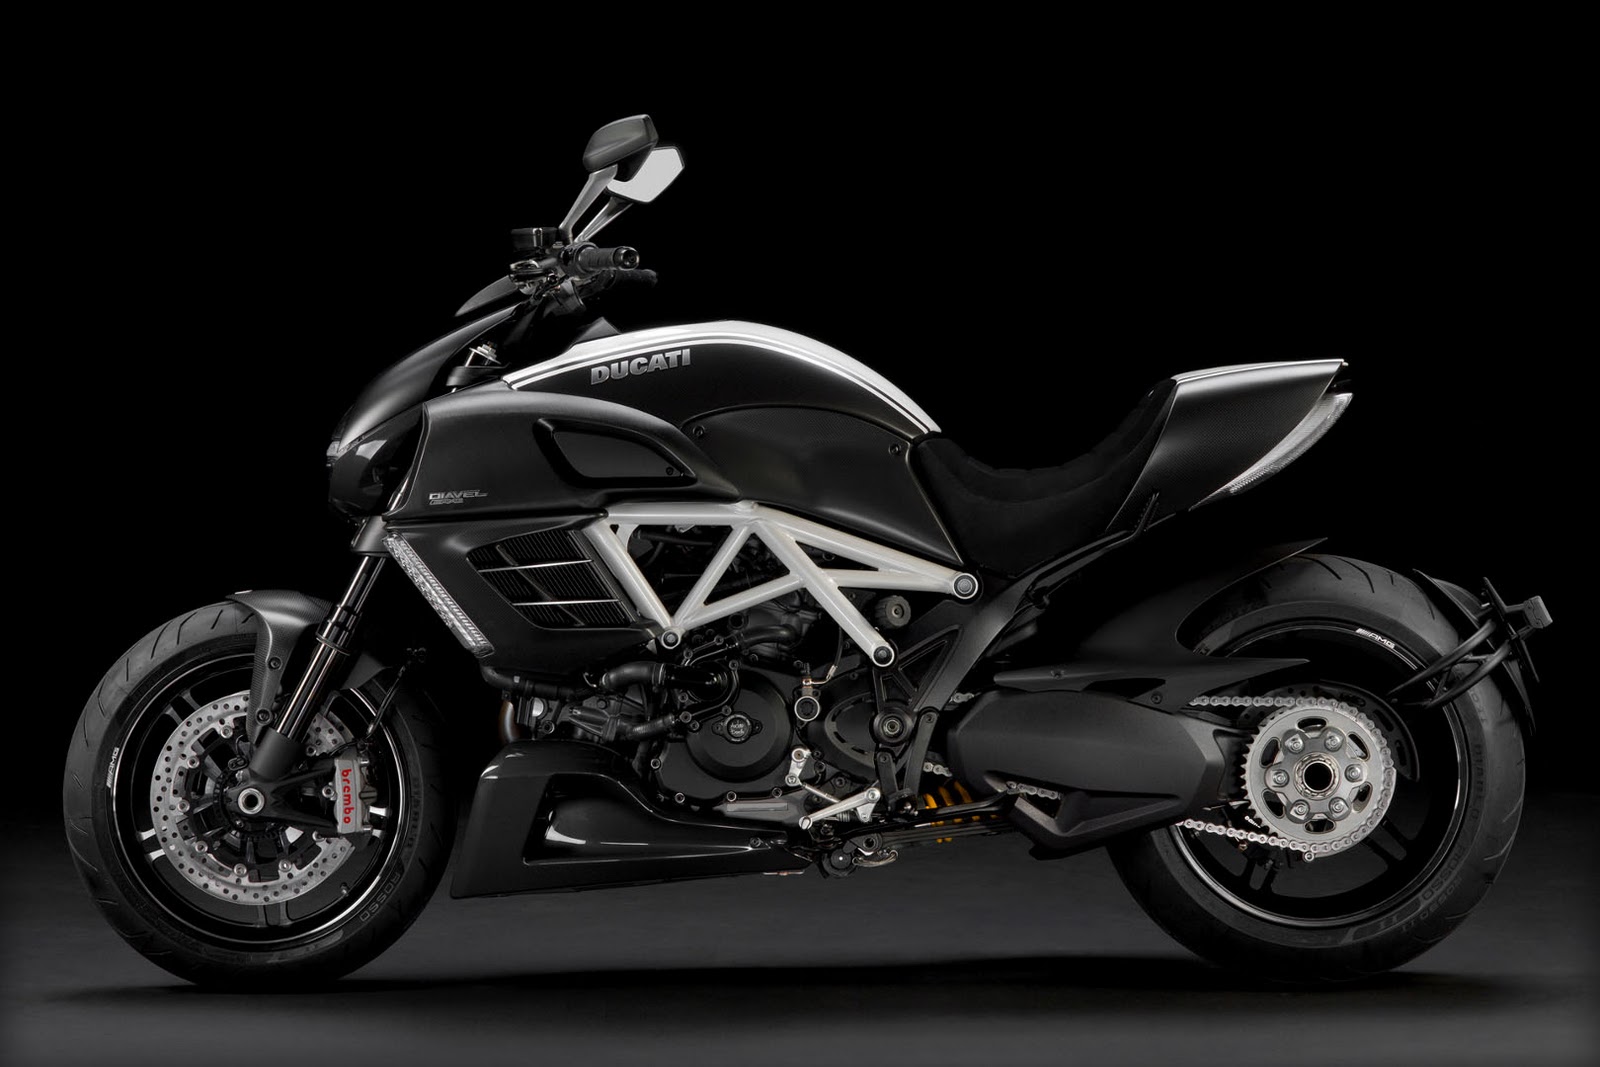 2012 Ducati Diavel AMG Limited Edition